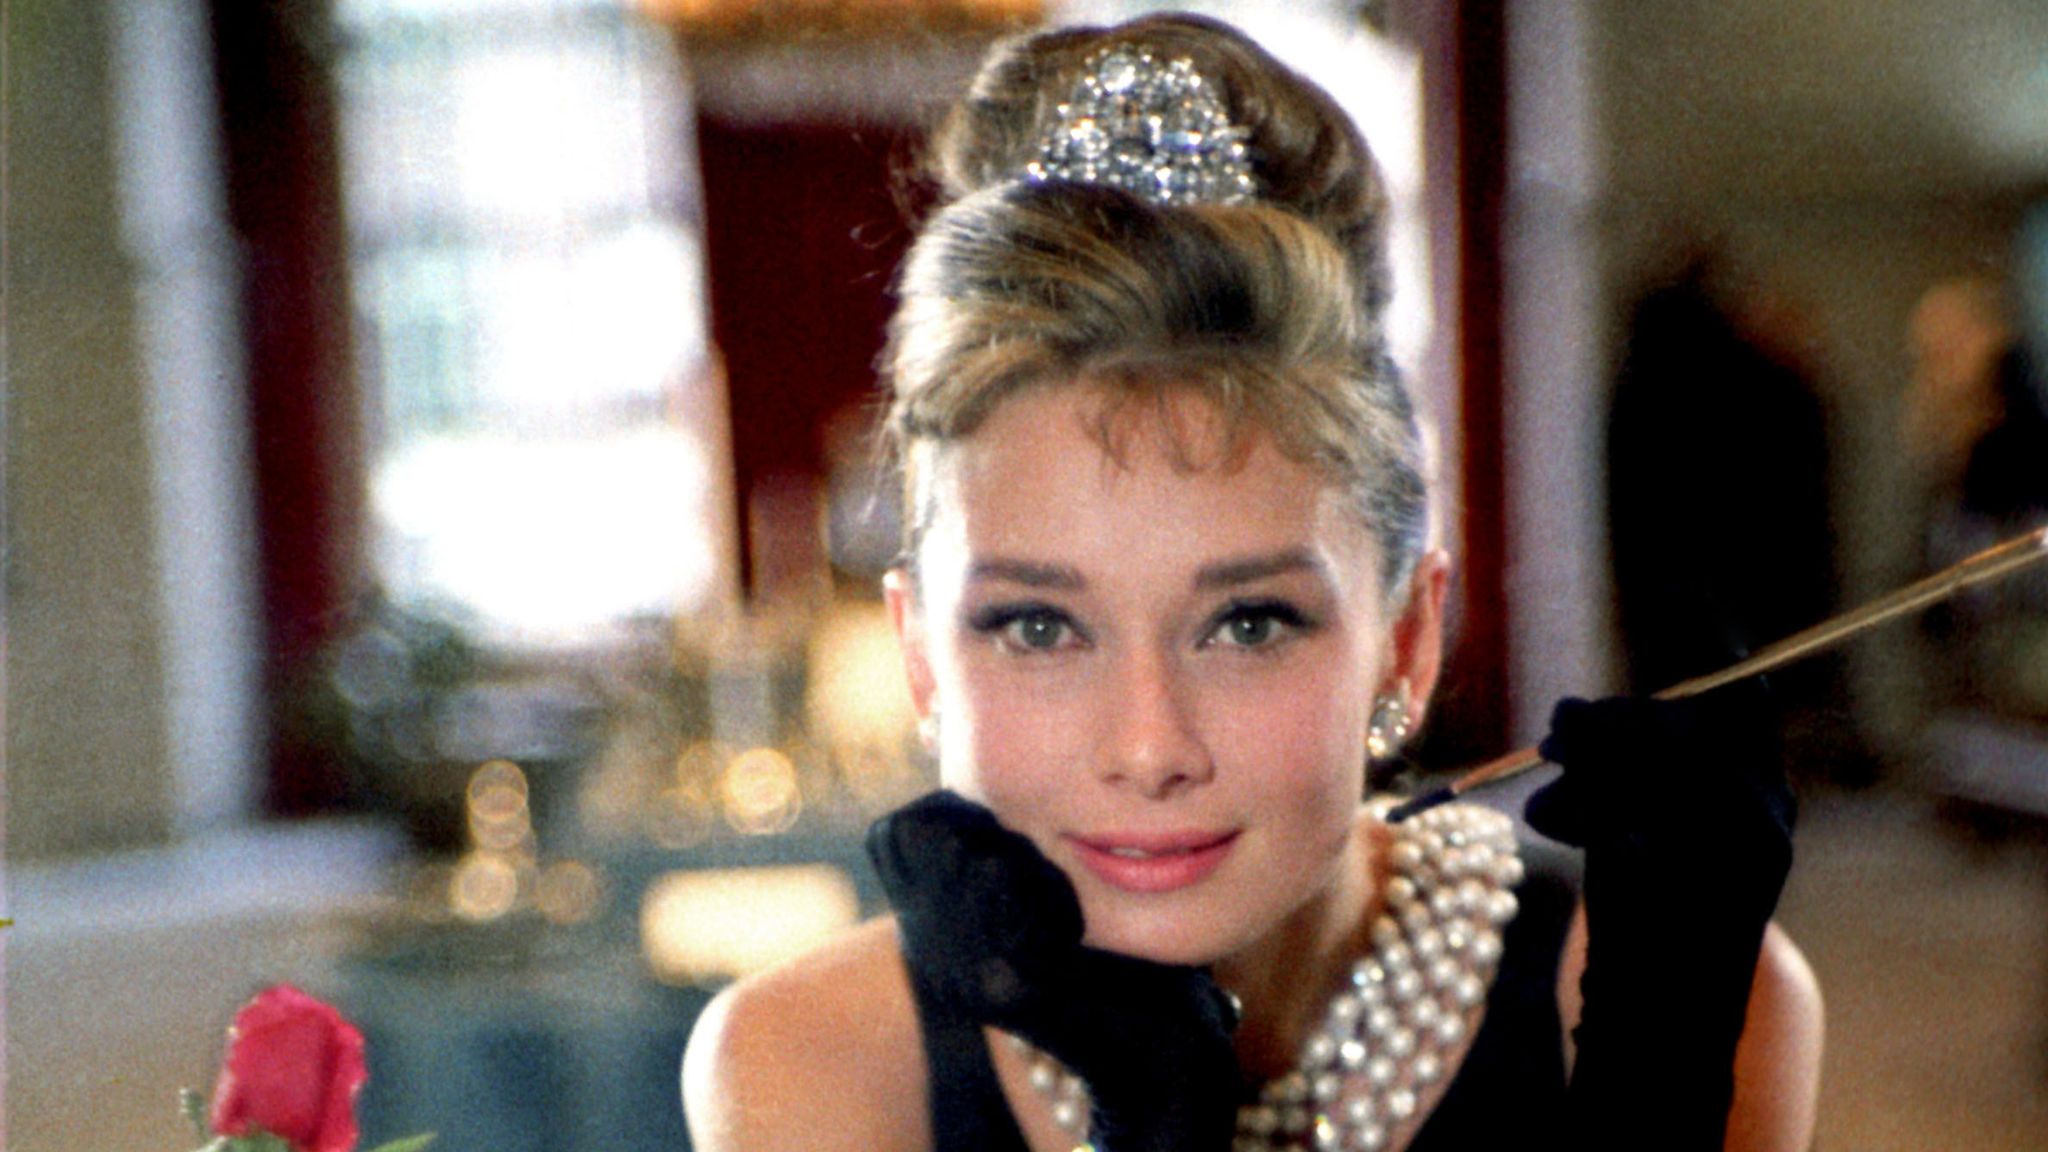 11 Things To Know About Audrey Hepburn's Beauty Regime